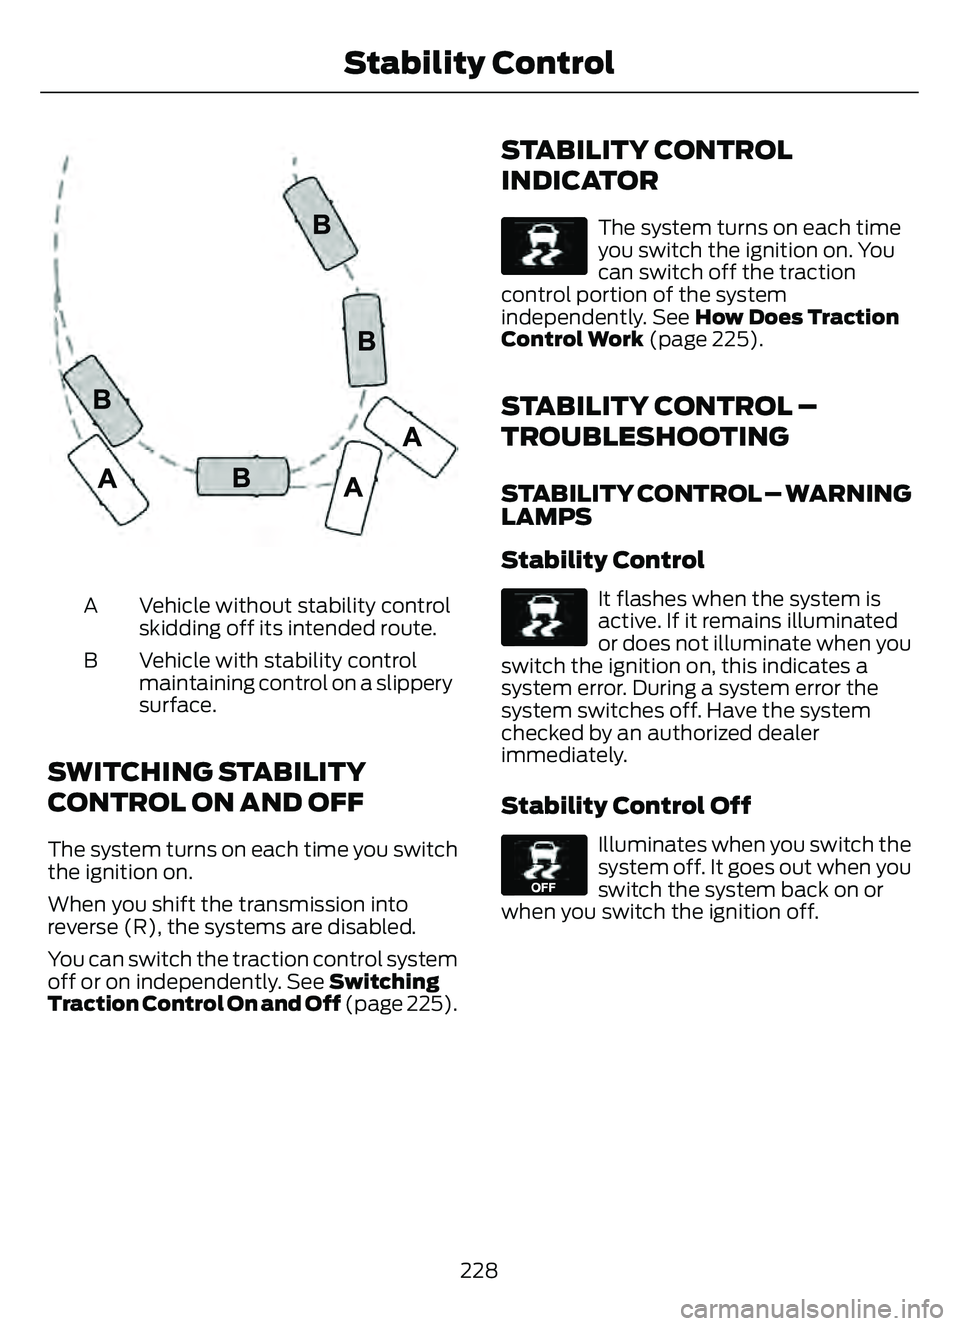 FORD ESCAPE 2022  Owners Manual E72903
Vehicle without stability control
skidding off its intended route.
A
Vehicle with stability control
maintaining control on a slippery
surface.
B
SWITCHING STABILITY
CONTROL ON AND OFF
The syste